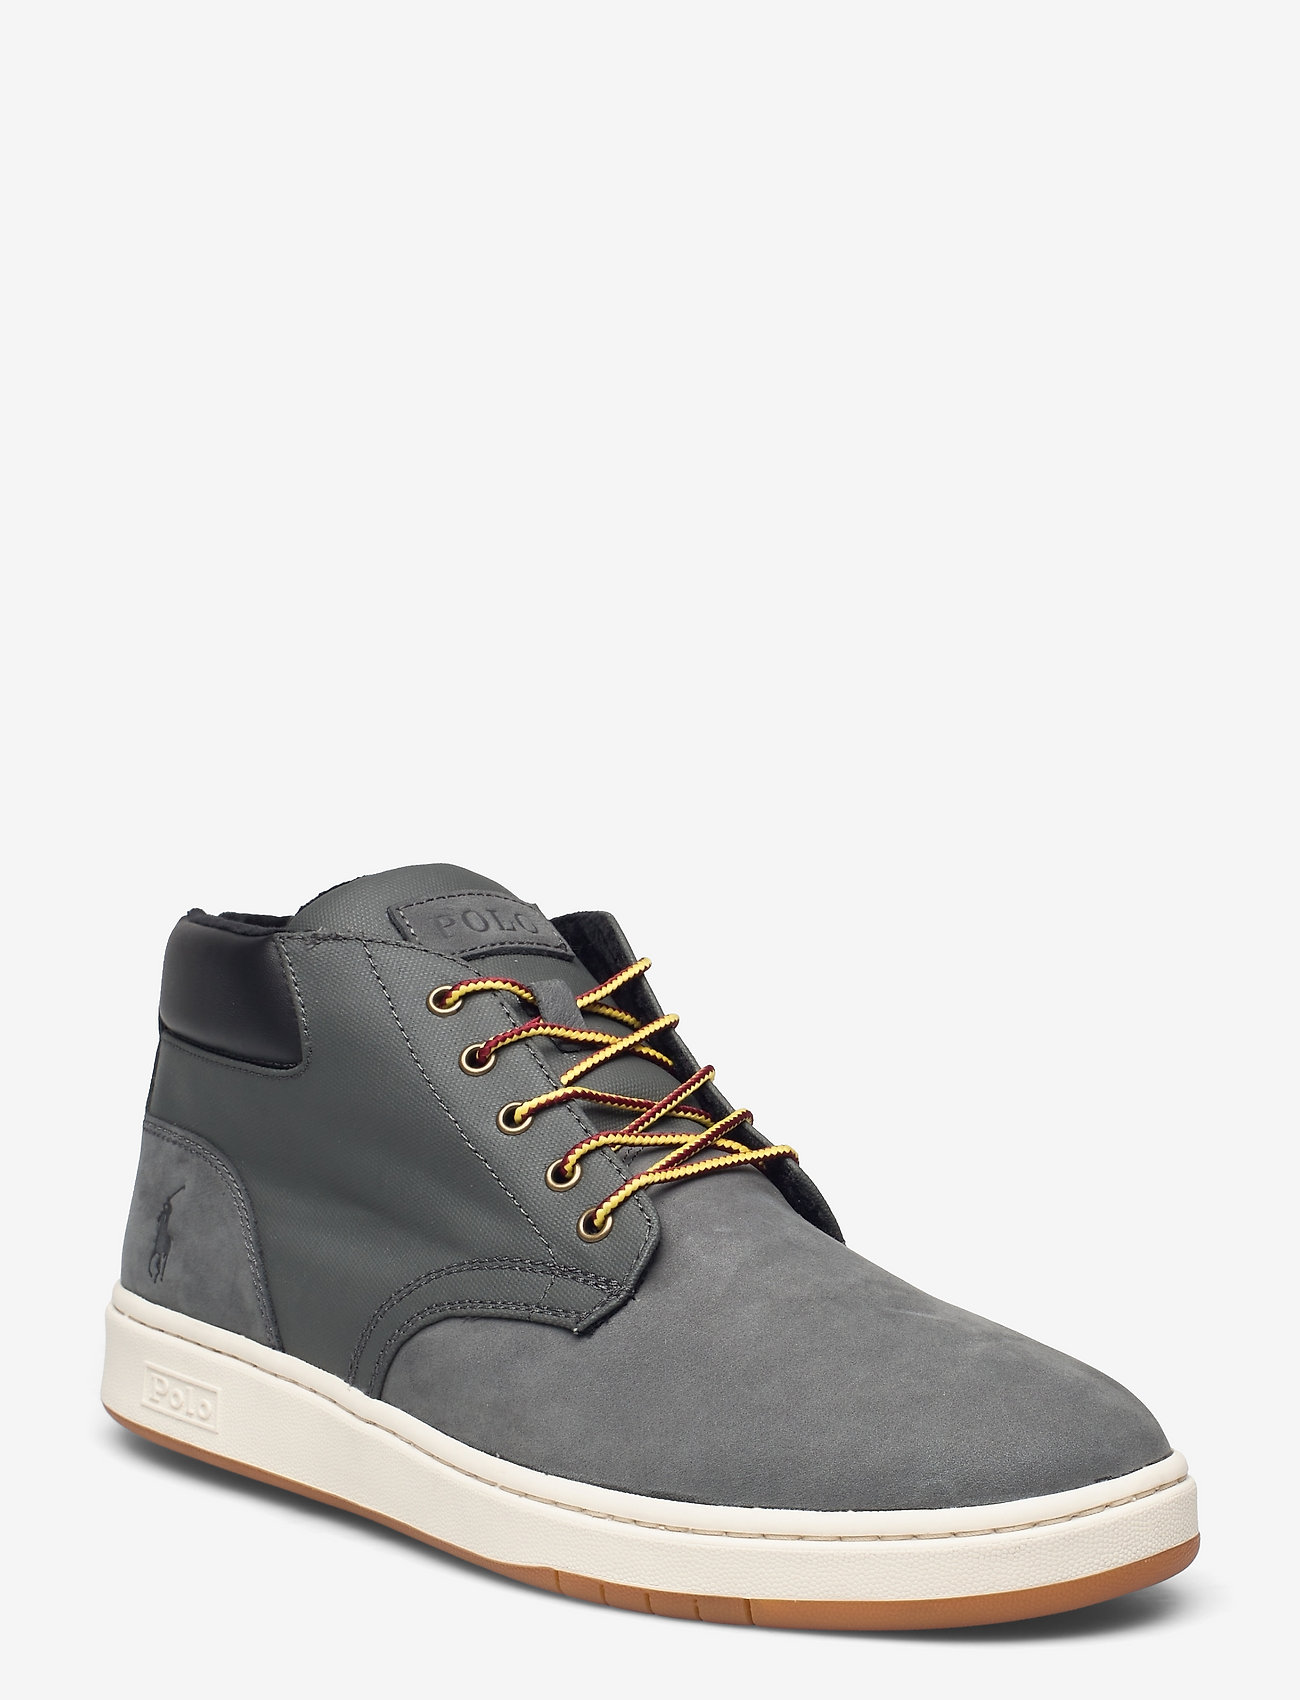 Polo Ralph Lauren - Nubuck & Canvas Sneaker Boot - laced boots - charcoal - 0